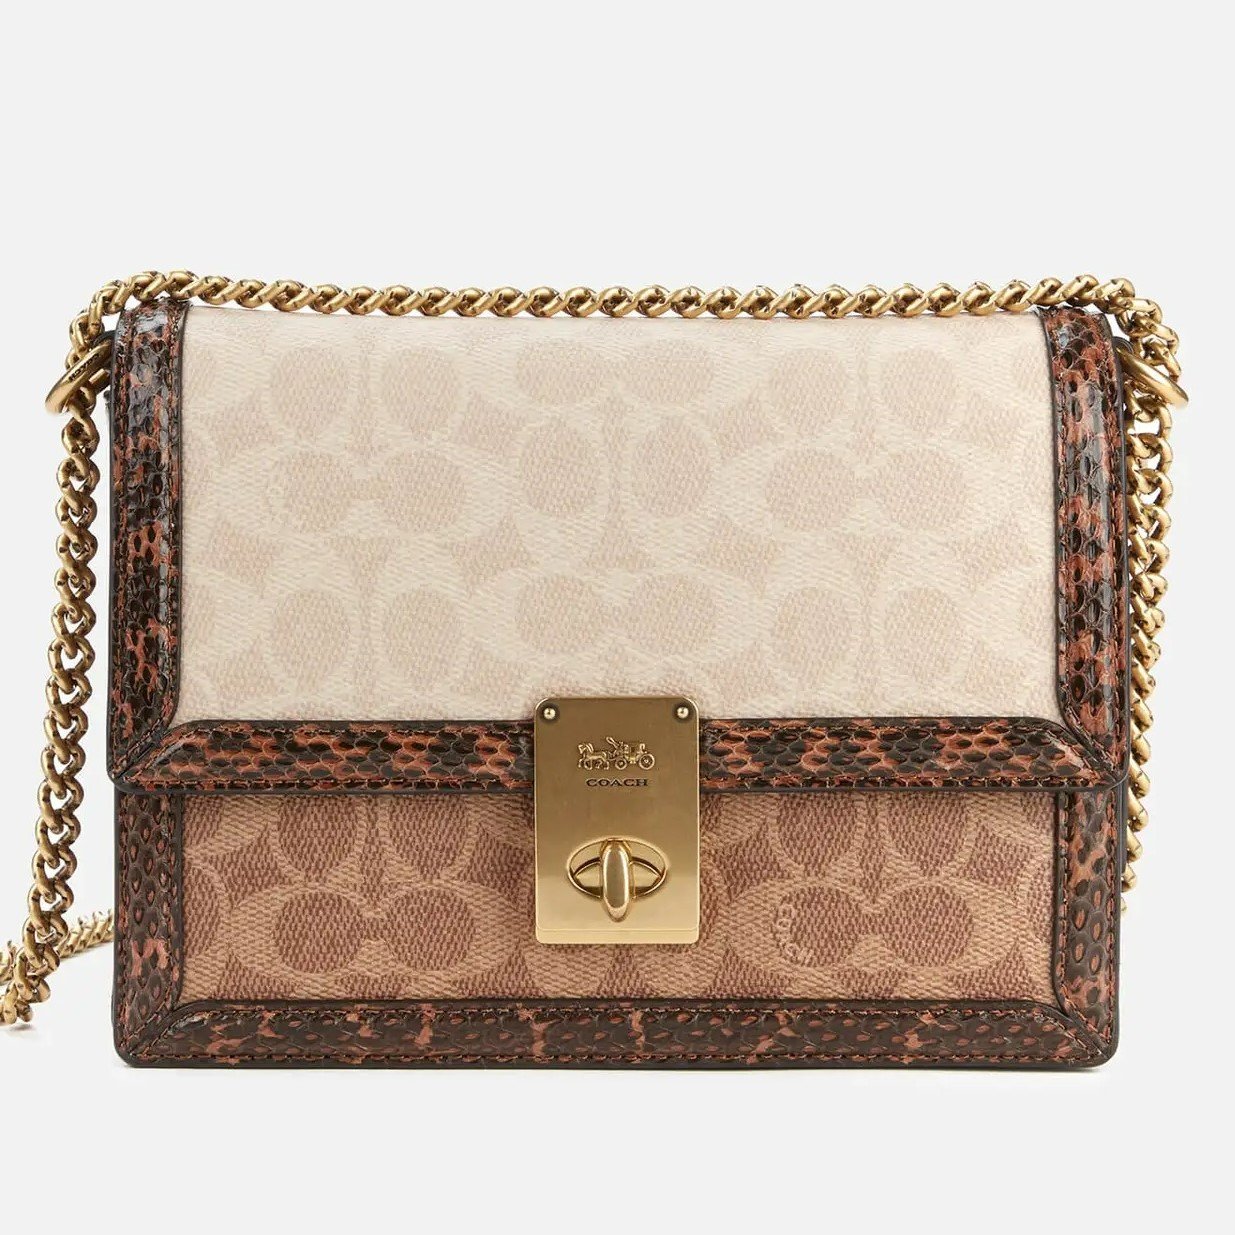 TÚI NỮ COACH HUTTON SHOULDER BAG IN BLOCKED SIGNATURE CANVAS WITH SNAKESKIN DETAIL 12